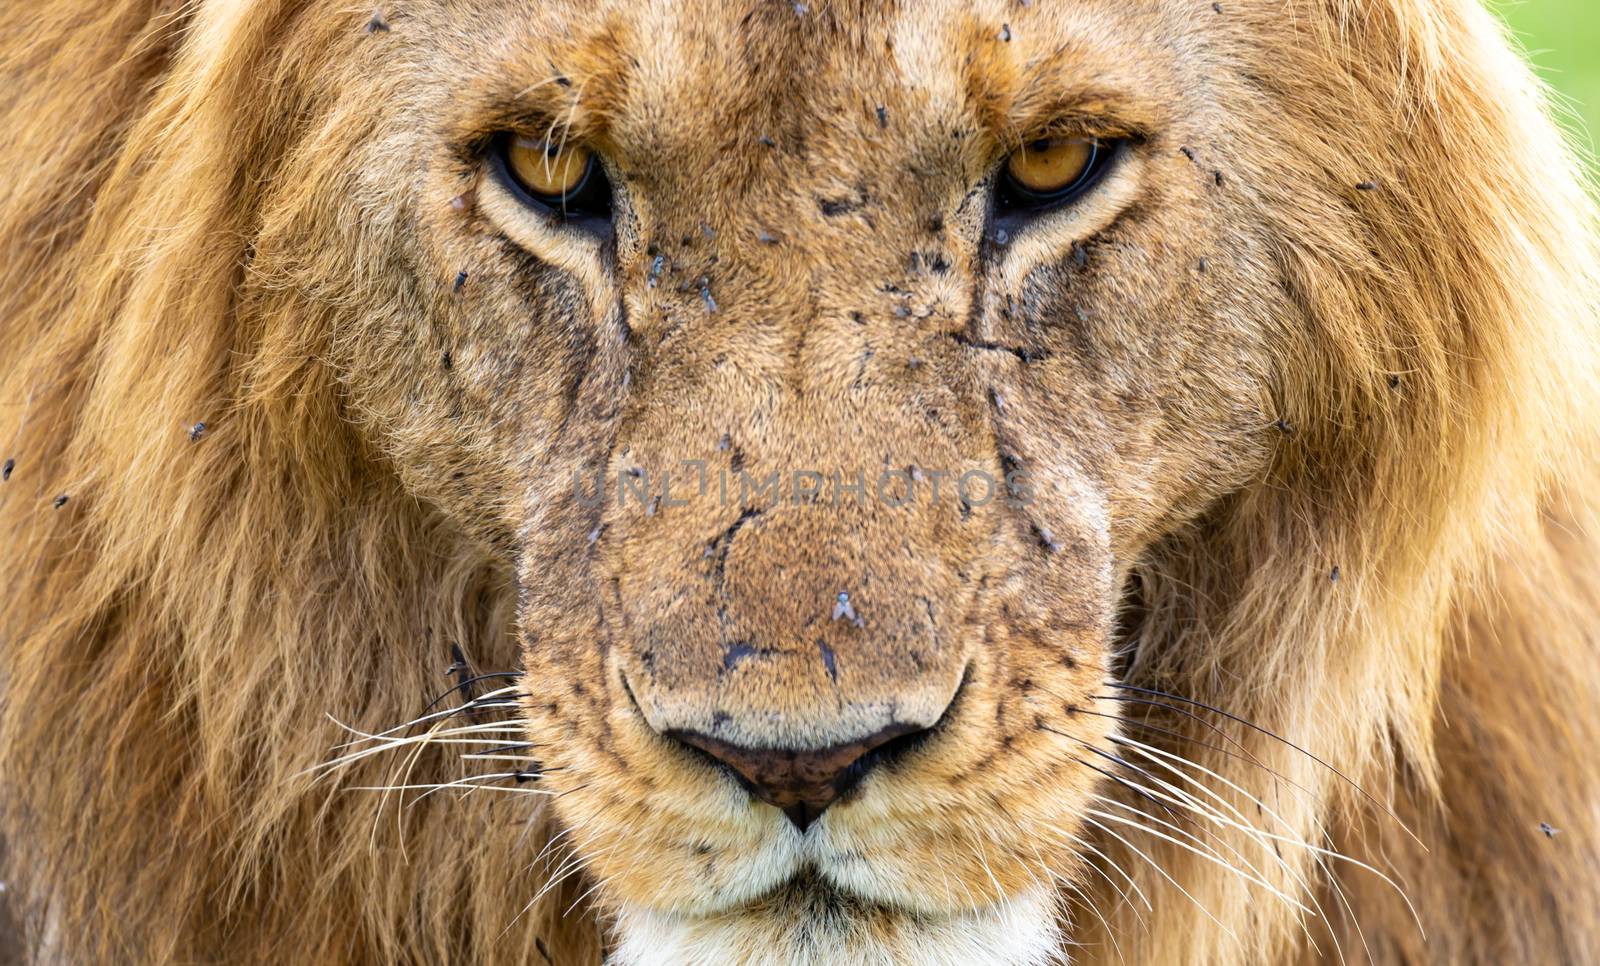 The face of a big lion in closeup by 25ehaag6